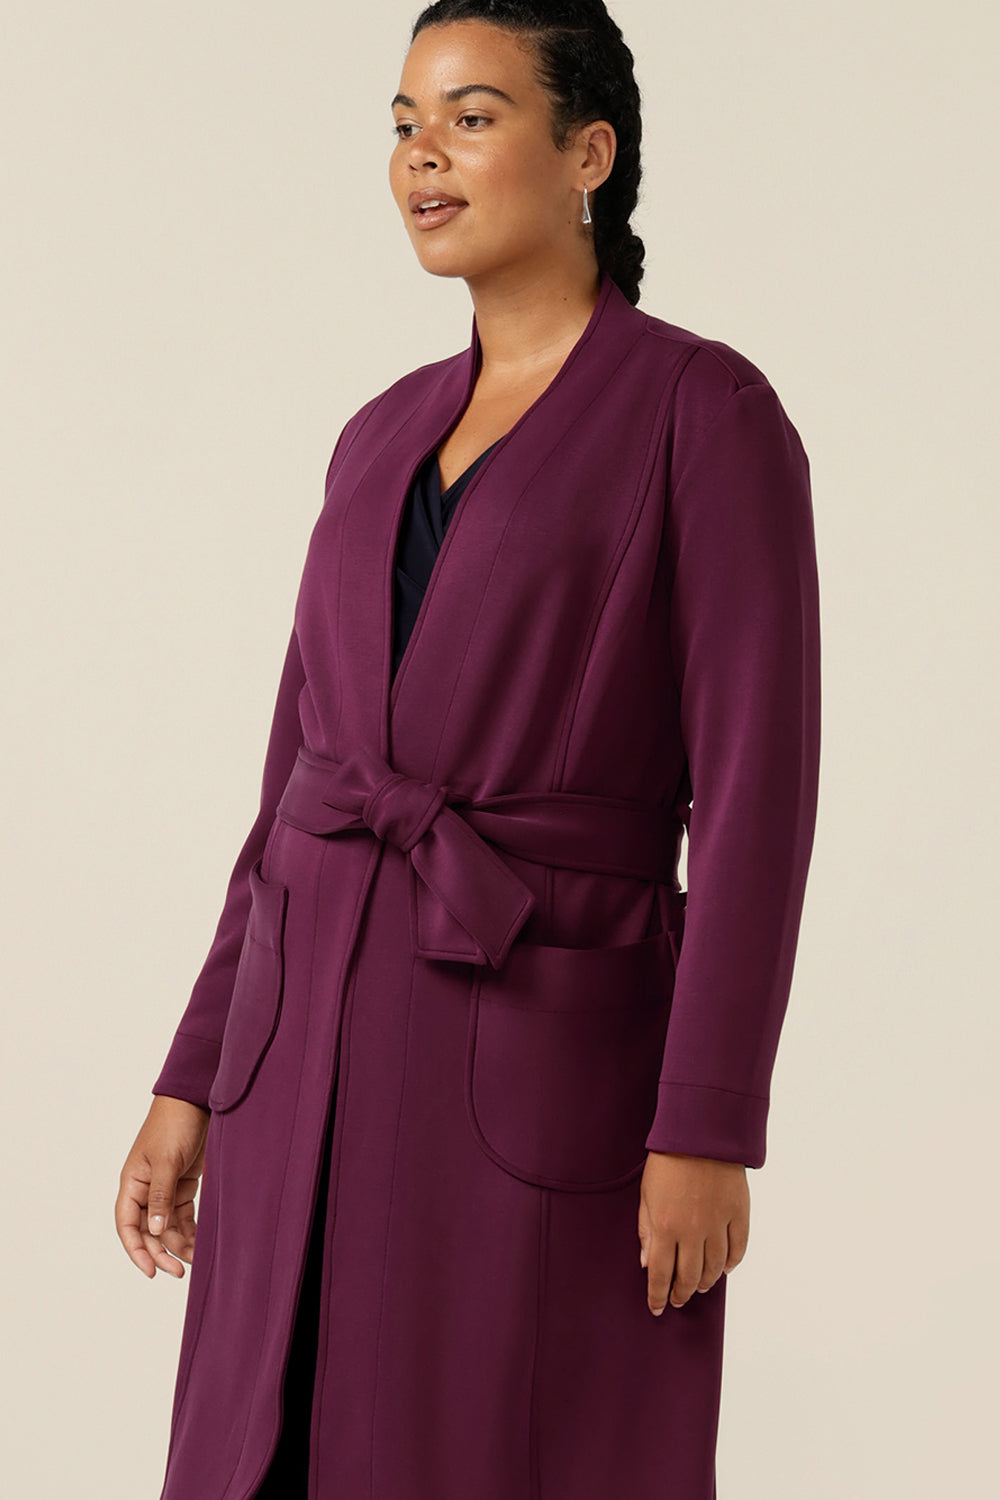 Light-weight and comfortable, L&F's wine red, Modal trenchcoat brings stylish winter layering offers stylish winter layering for the Australian and New Zealand winters.